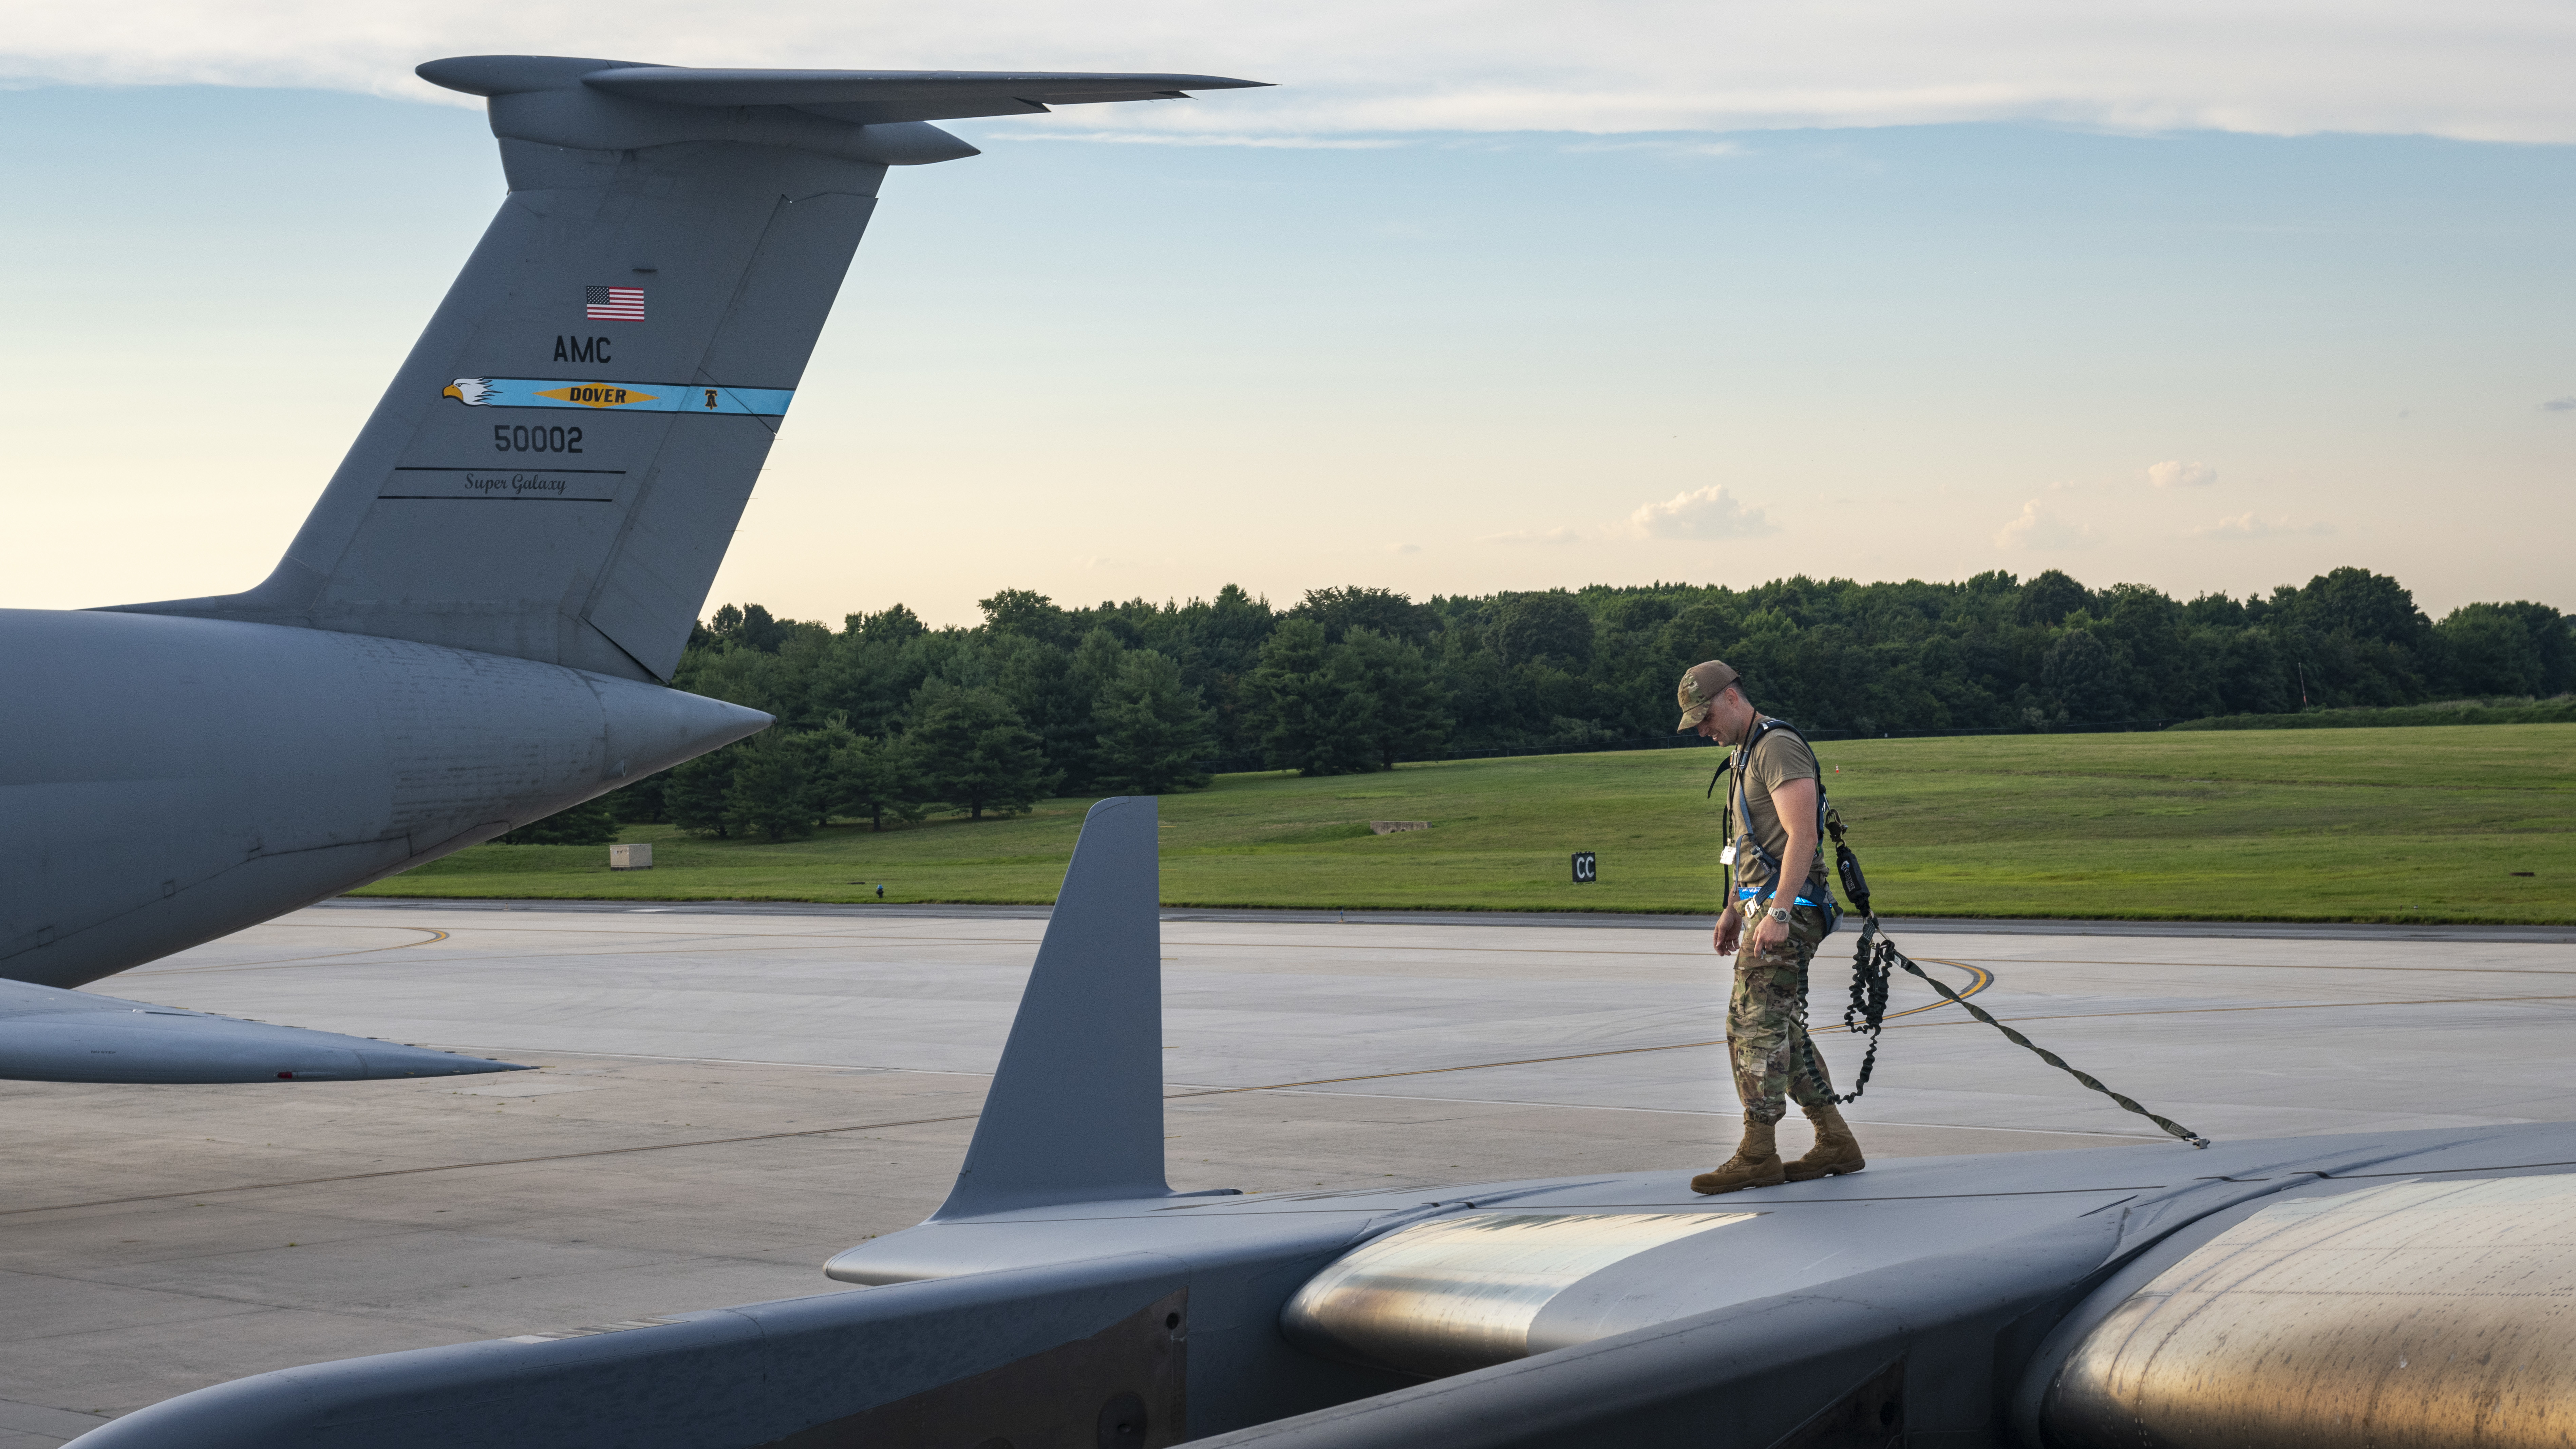 U.S. Air Force Tech. Sgt. Colin McCready, 712th Aircraft Maintenance Squadron maintainer, inspects the wing of a C-17 Globemaster III during the Liberty Eagle Readiness Exercise at Dover Air Force Base, Delaware, July 15, 2022. McCready is one of many maintainers from the 512th and 436th airlift wings who worked together during a simulated deployment to a forward operating base, located on Dover AFB, July 11-15, 2022. The purpose of this exercise was to validate both wings' ability to generate, employ and sustain airpower across the world in a contested and degraded operational environment. (U.S. Air Force photo by Senior Airman Ruben Rios)